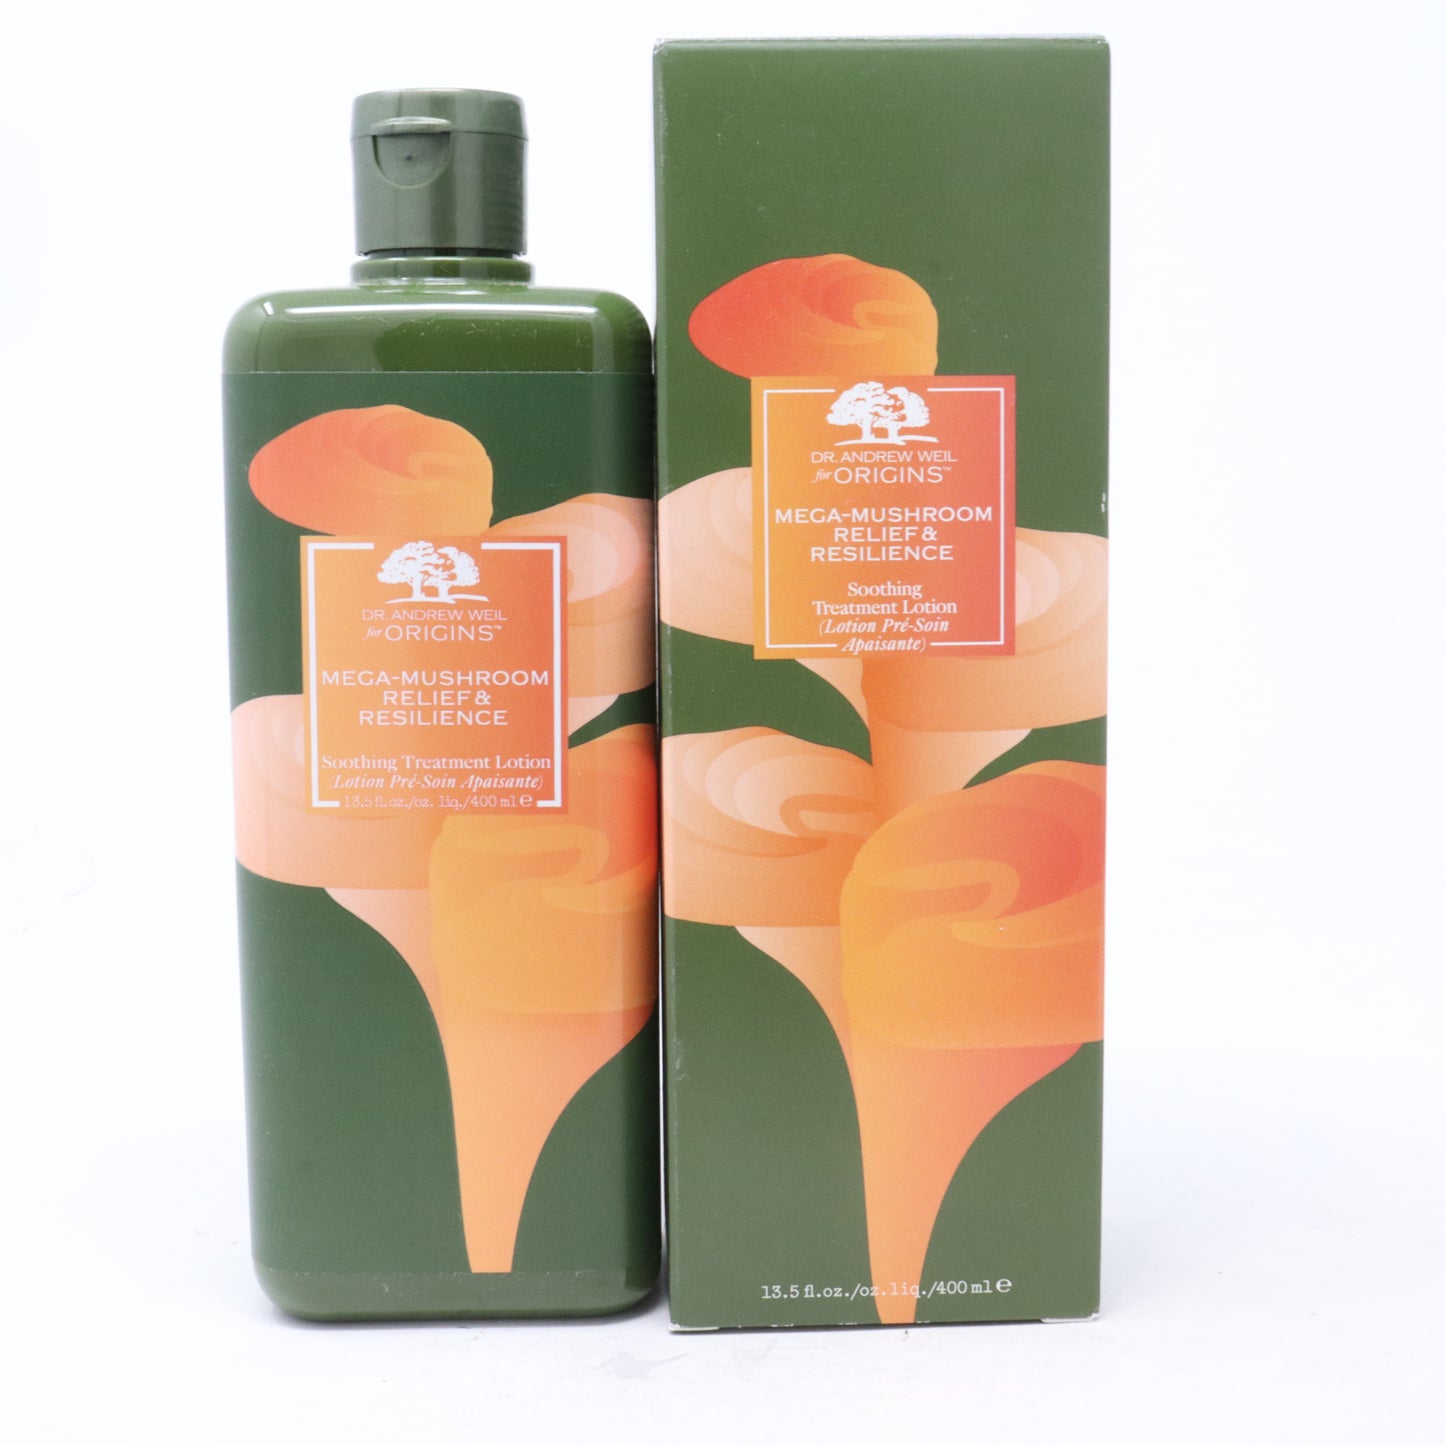 Mega-Mushroom Relief & Resilience Soothing Treatment Lotion 400 ml